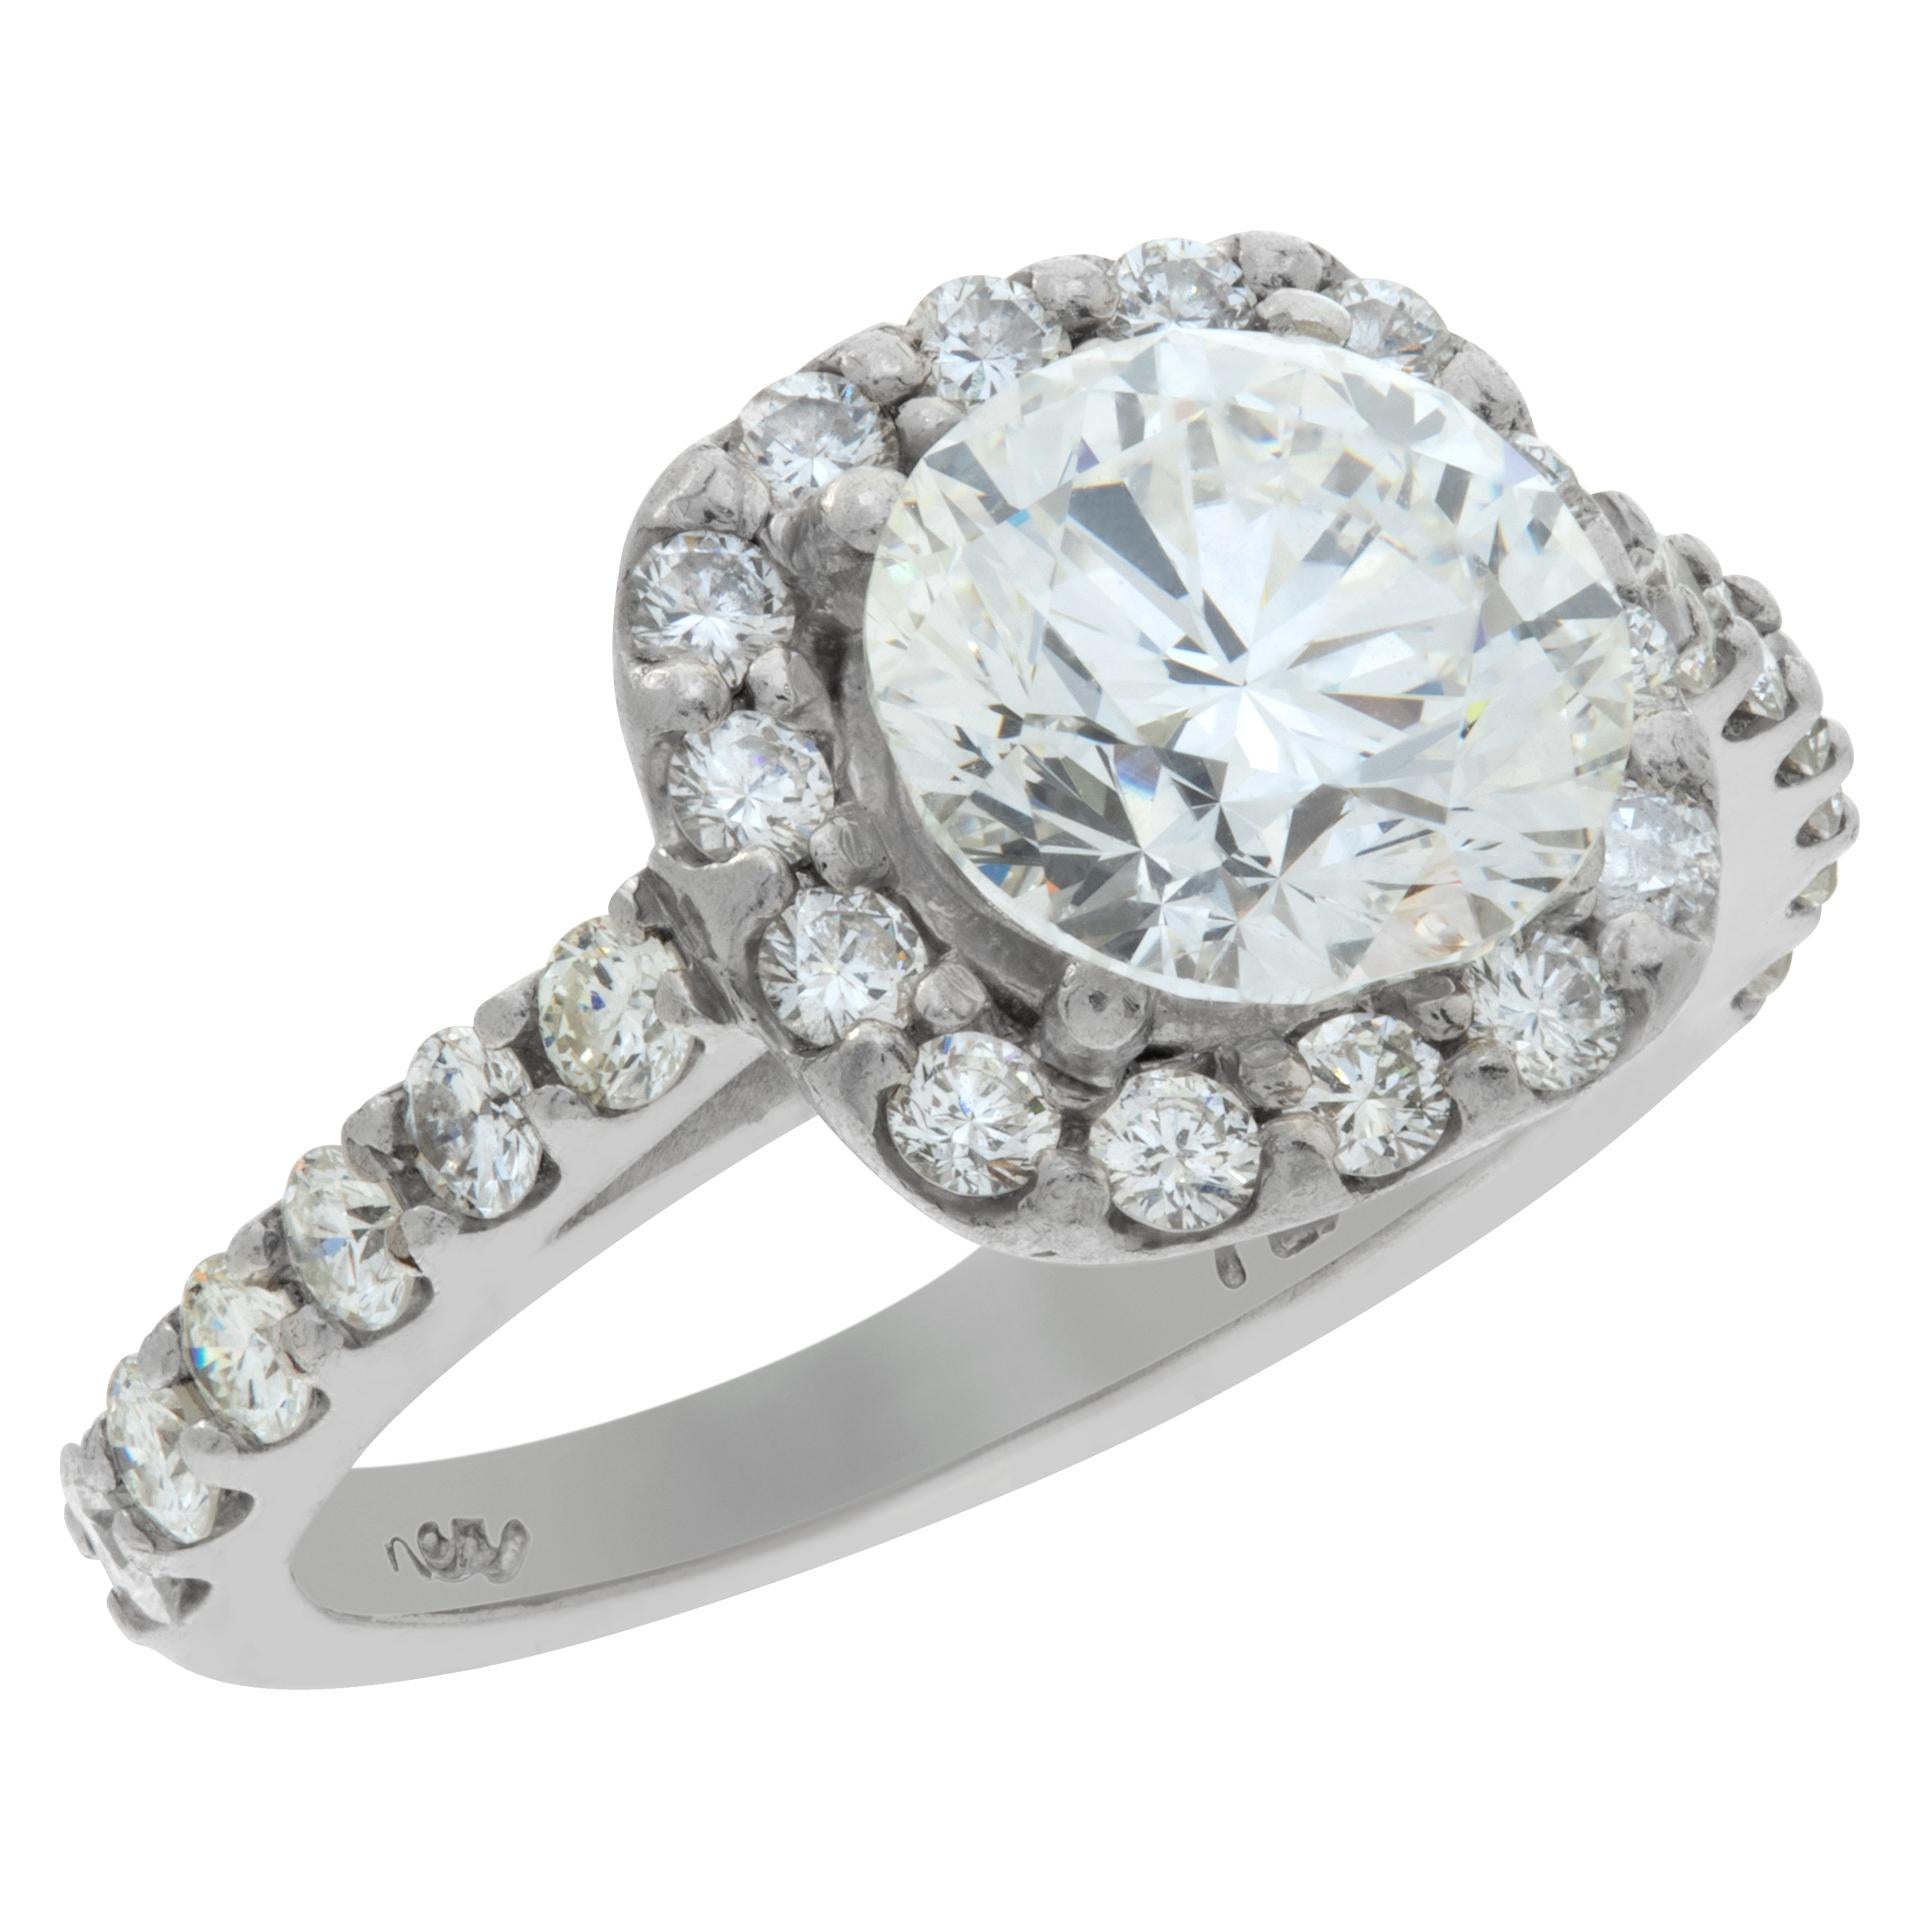 GIA Certified Round Brilliant Cut Diamond 2.03 Carat Platrinum Ring In Excellent Condition For Sale In Surfside, FL